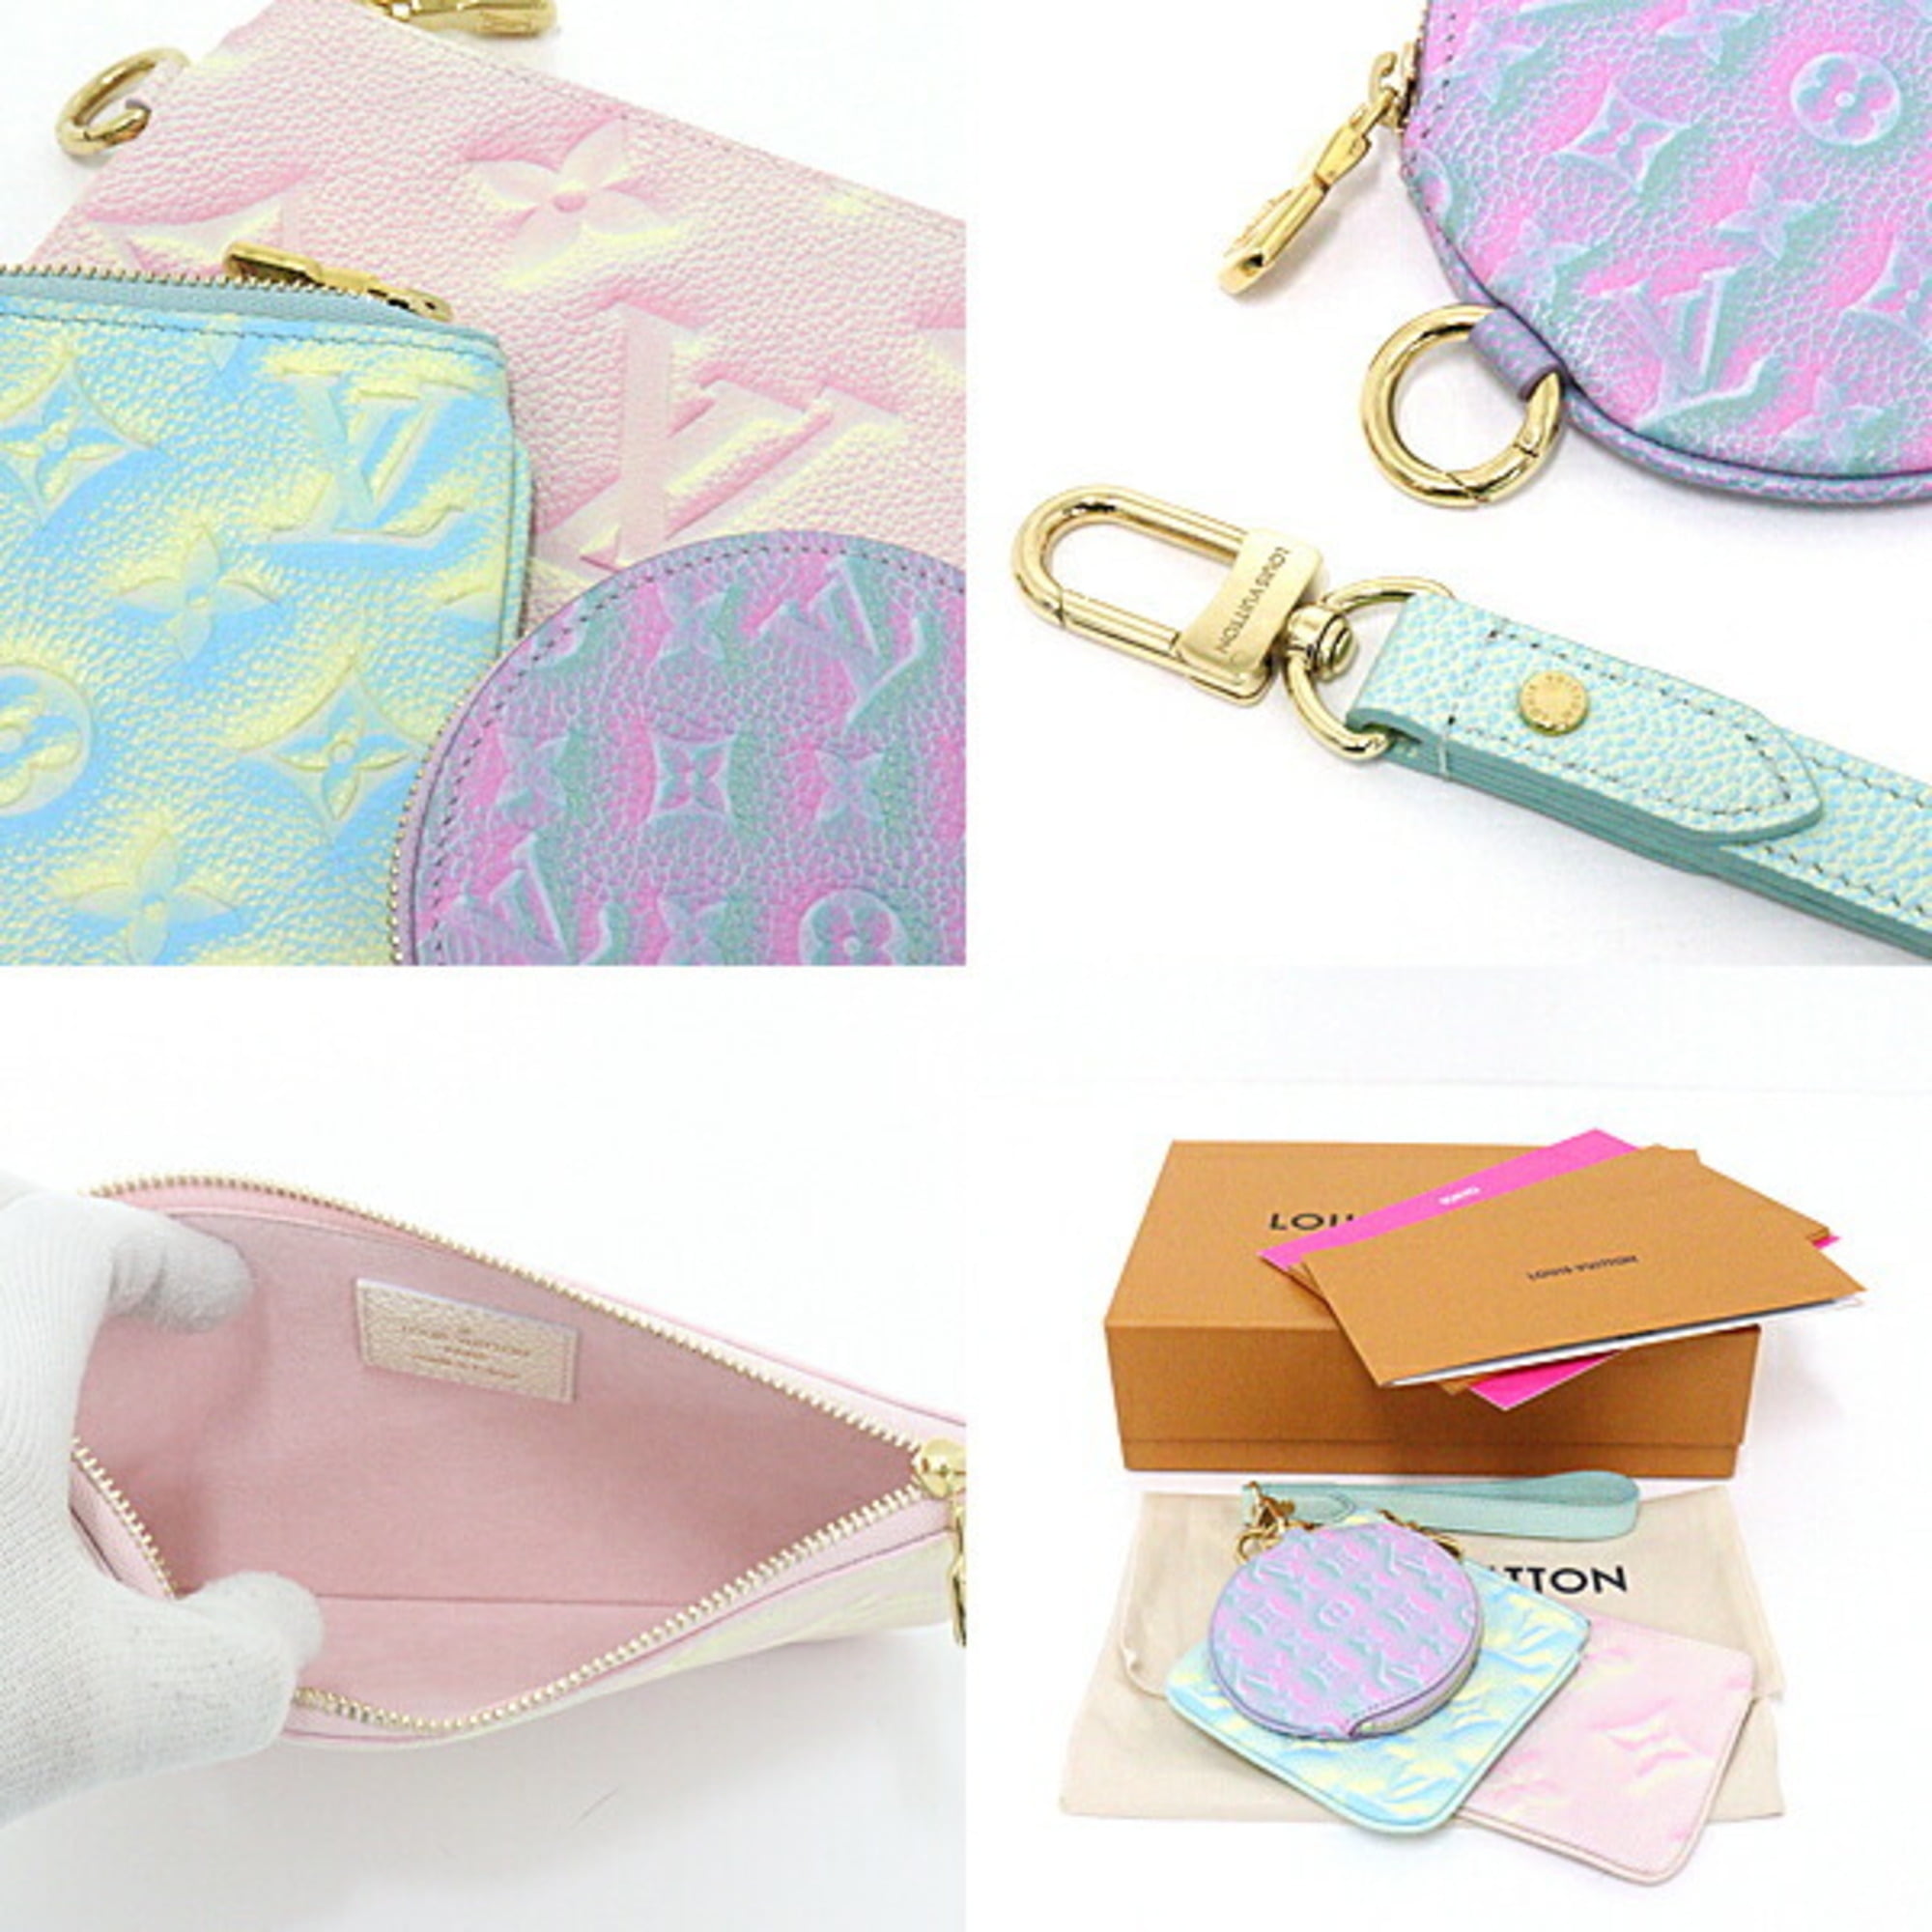 Louis Vuitton Key Pouch in Stardust Pink JAPAN EXCLUSIVE